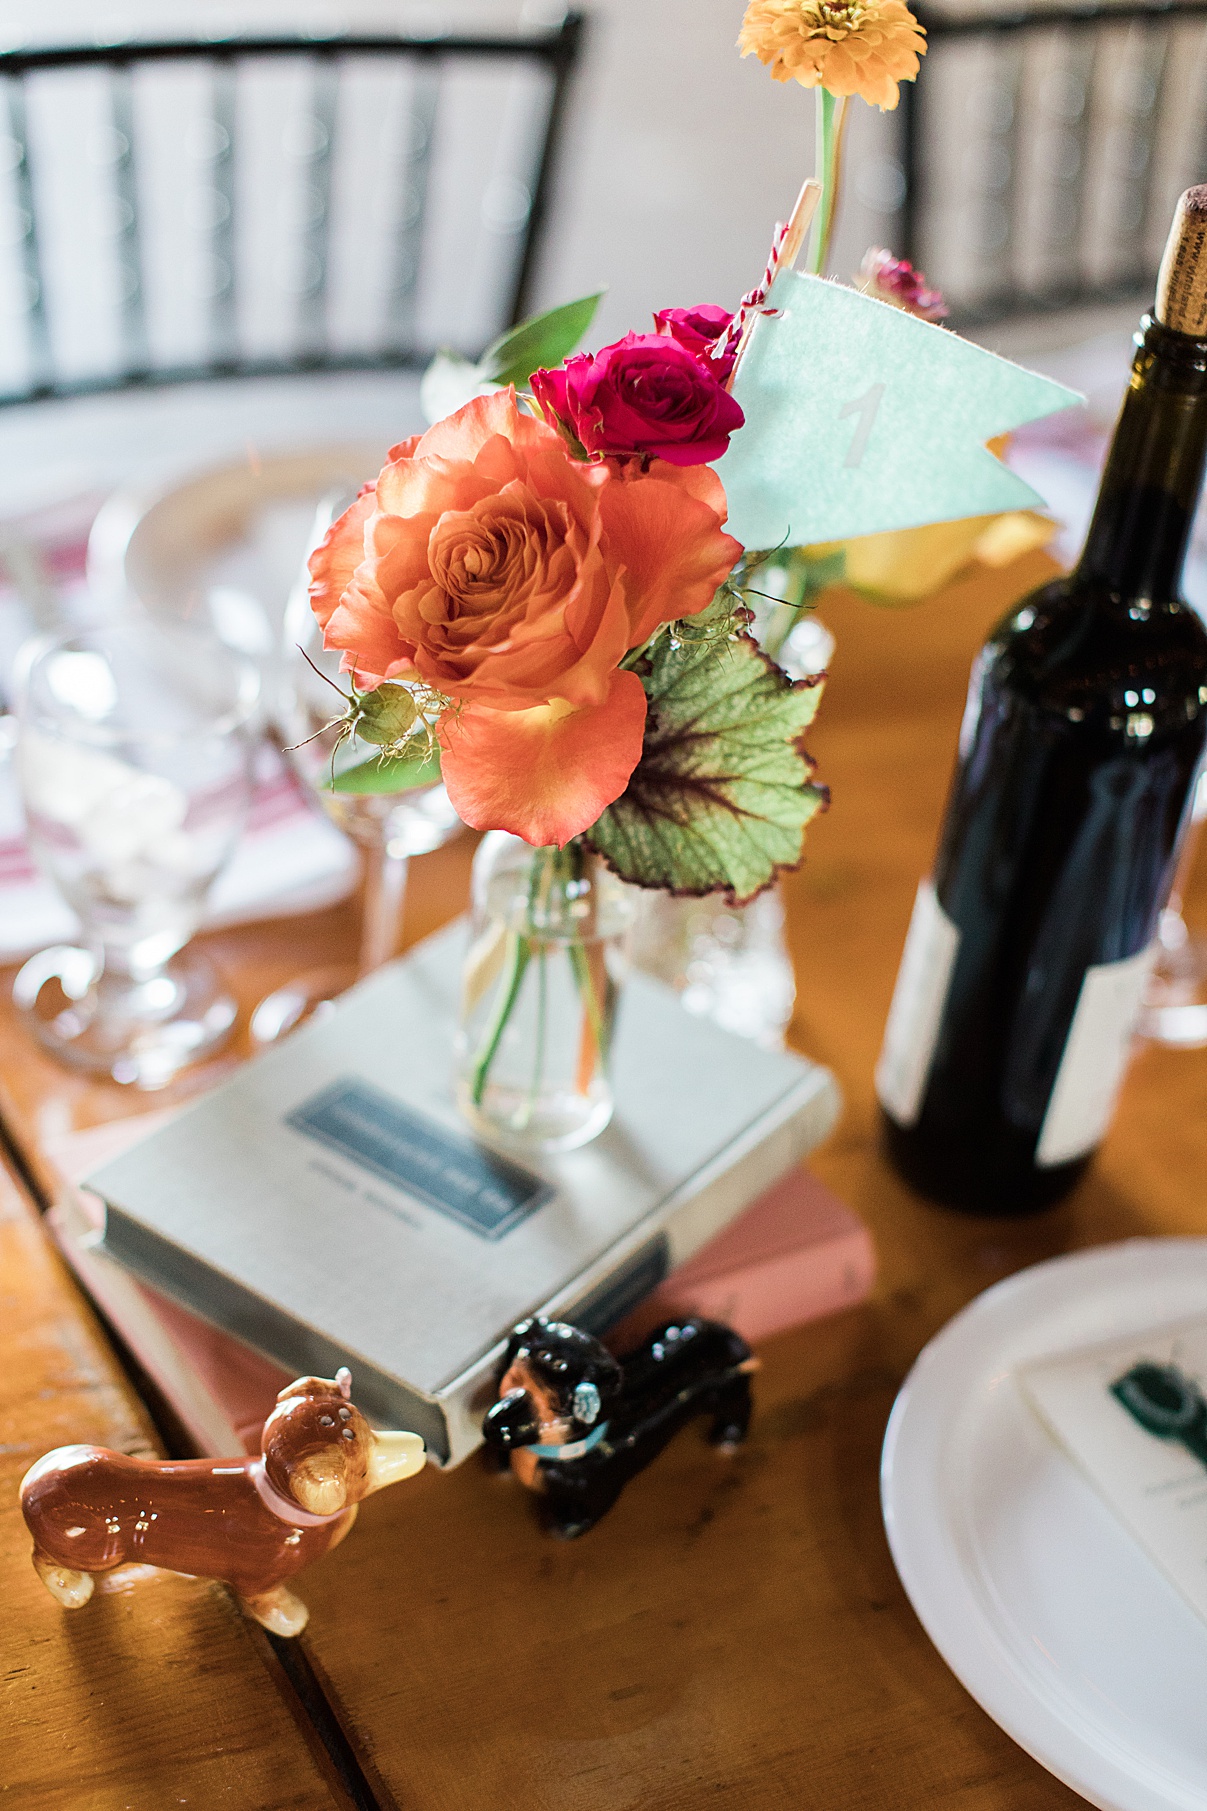 Single flower on book for table setting at reception at Balls Falls, Ontario Wedding| Ontario Wedding Photographer| Toronto Wedding Photographer| 3Photography| 3photography.ca